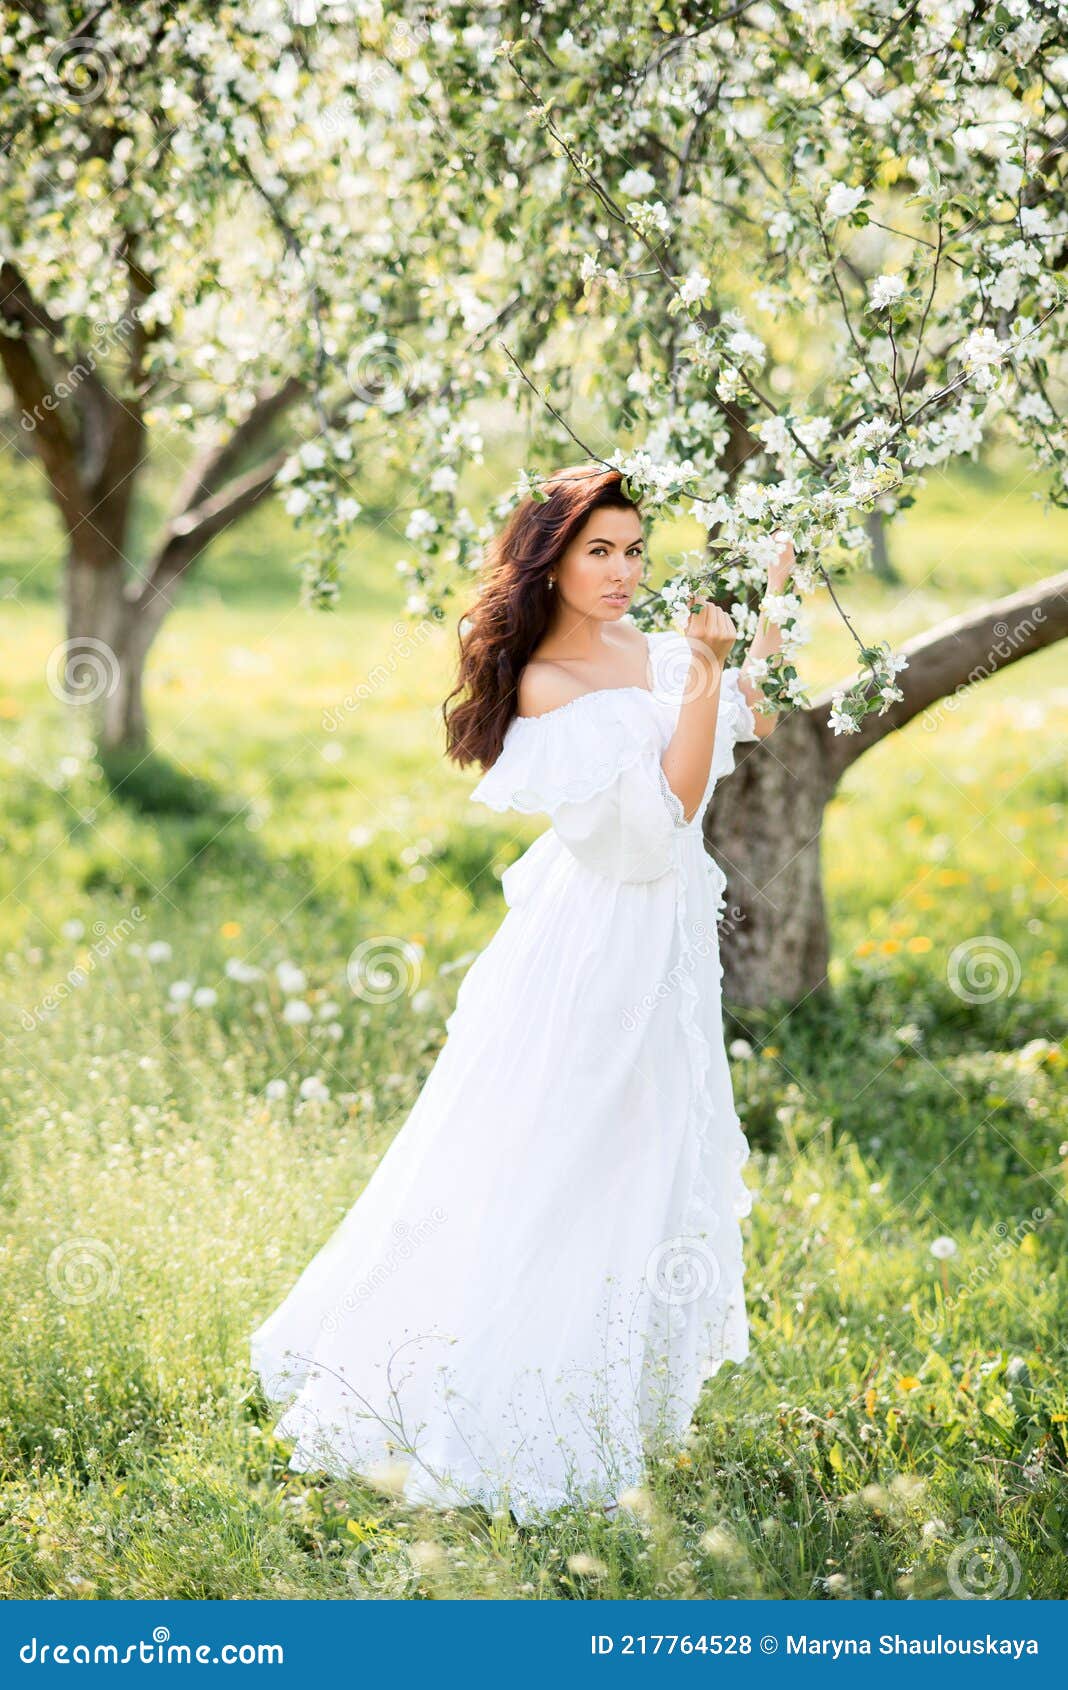 1,565,573 Beautiful Girl Dress Stock Photos - Free & Royalty-Free Stock  Photos from Dreamstime